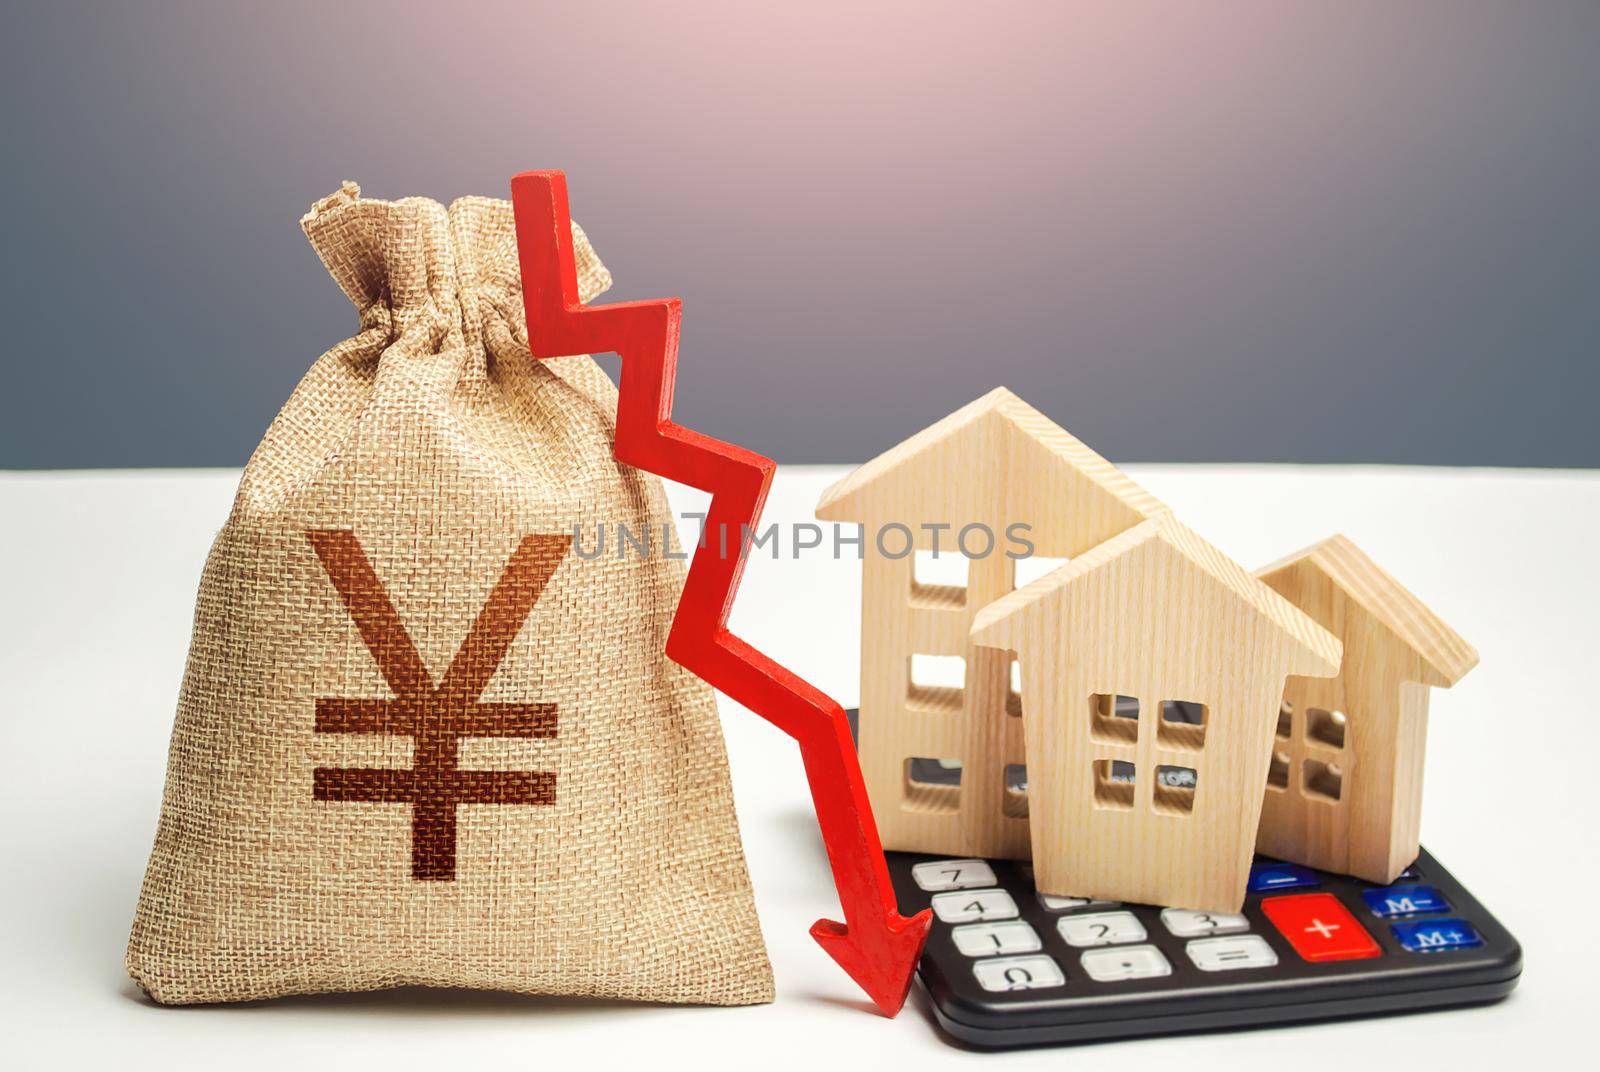 Yuan Yen money bag with down arrow and houses on calculator. Saving resources and reducing maintaining cost, energy efficiency. Falling real estate market, low prices and demand.